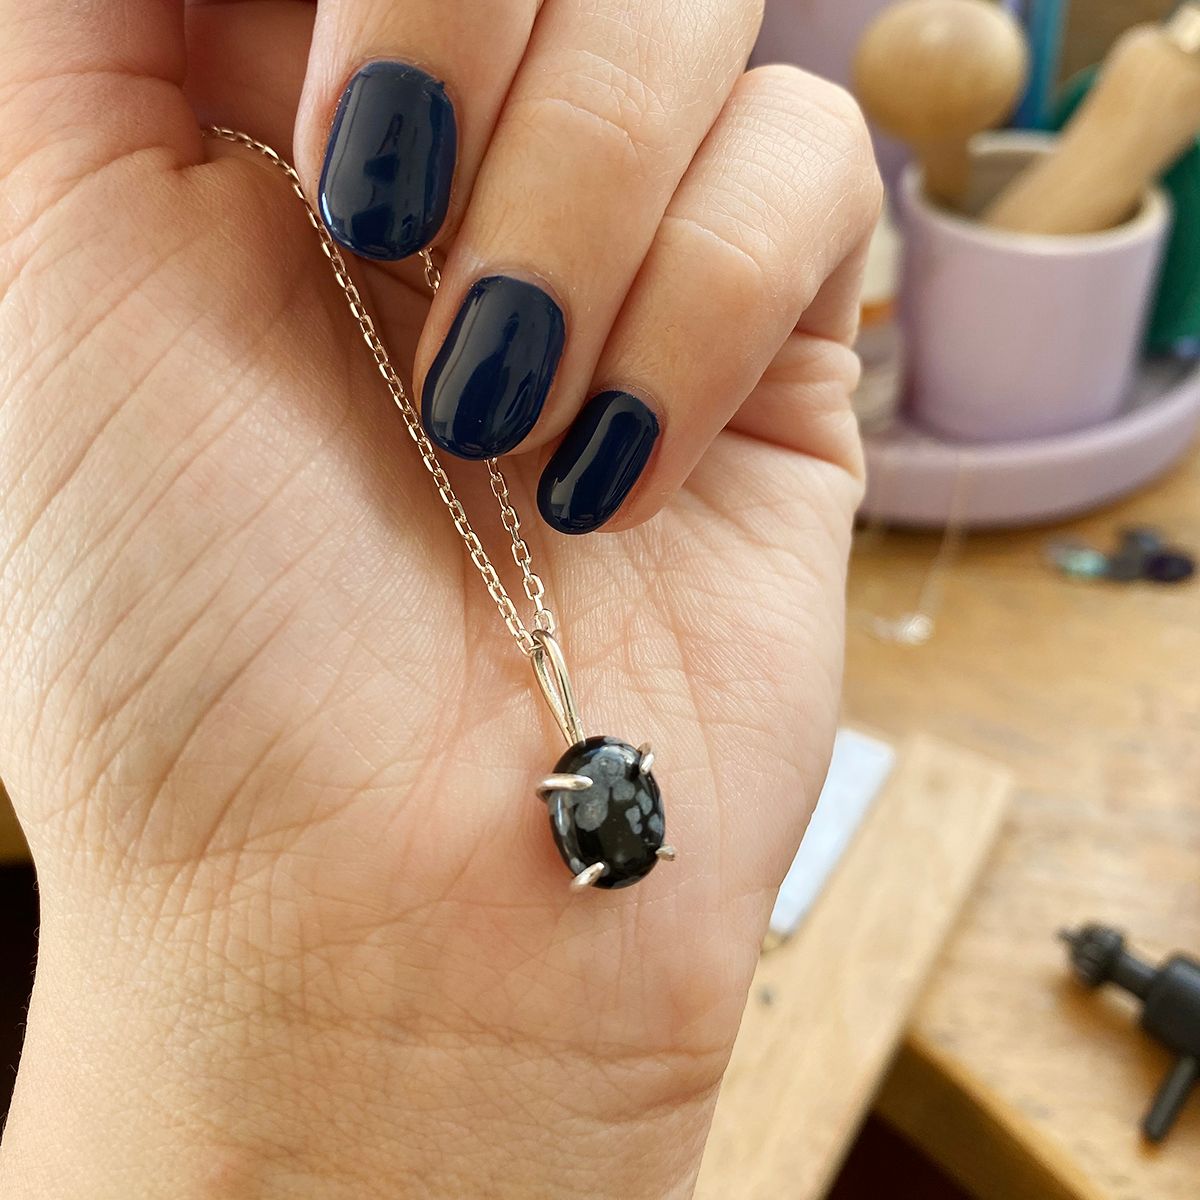 Have All This: You Don't Need a Fancy Torch to Make Great Jewelry